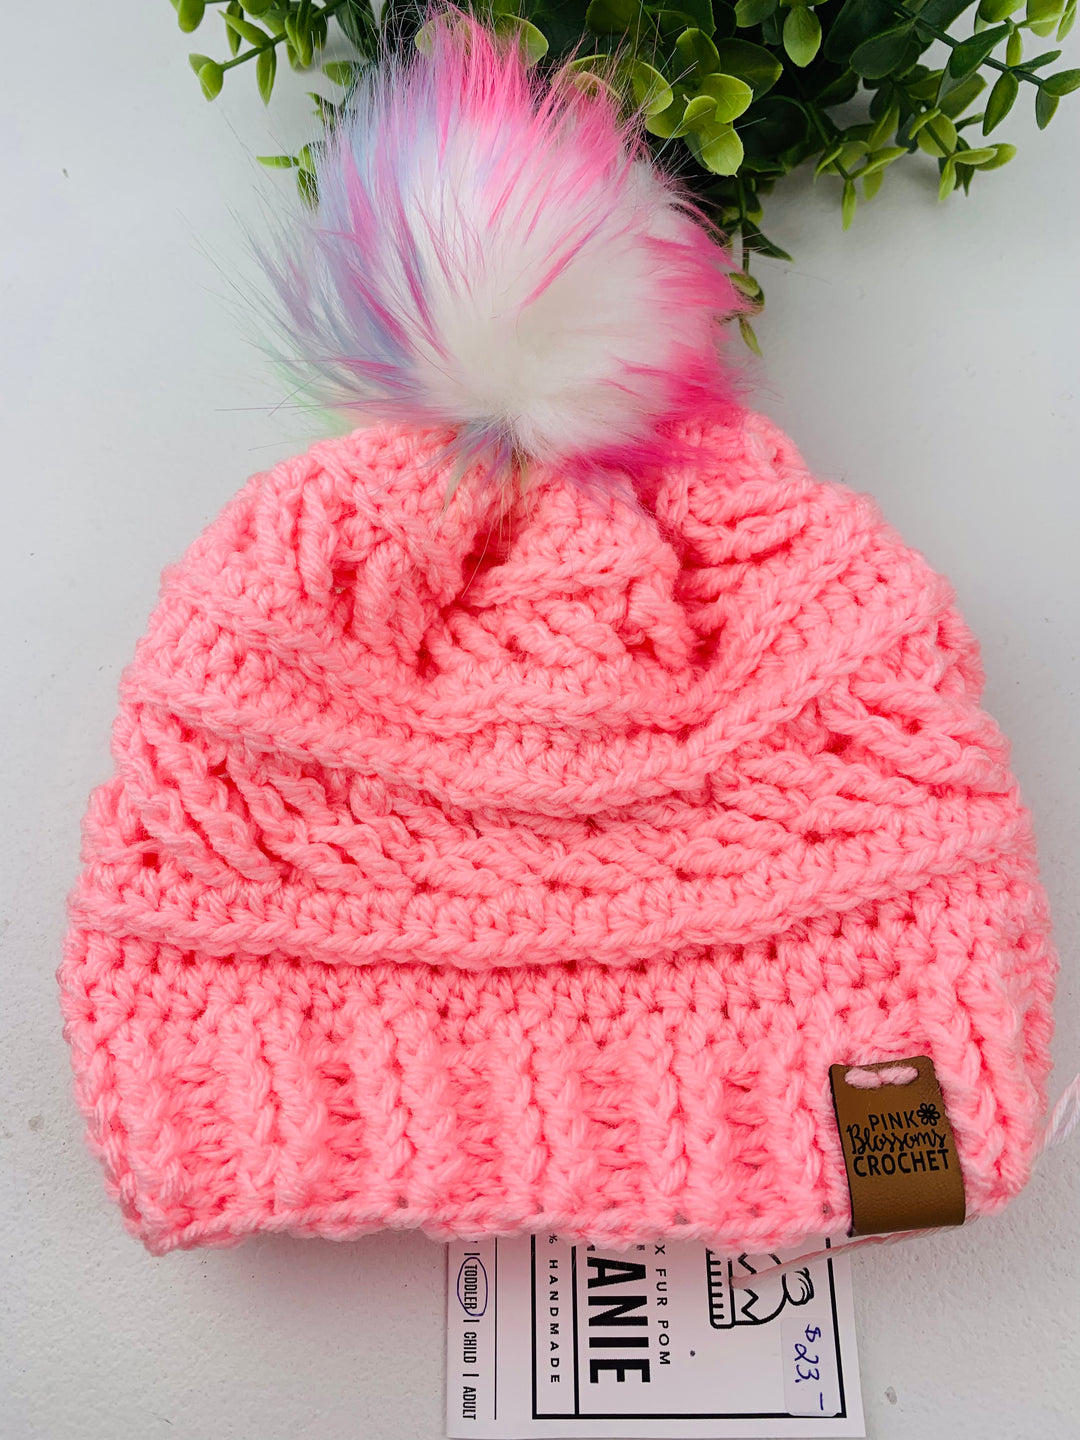 Pink Blossom Crochet, Snap PomPom Crocheted Toques